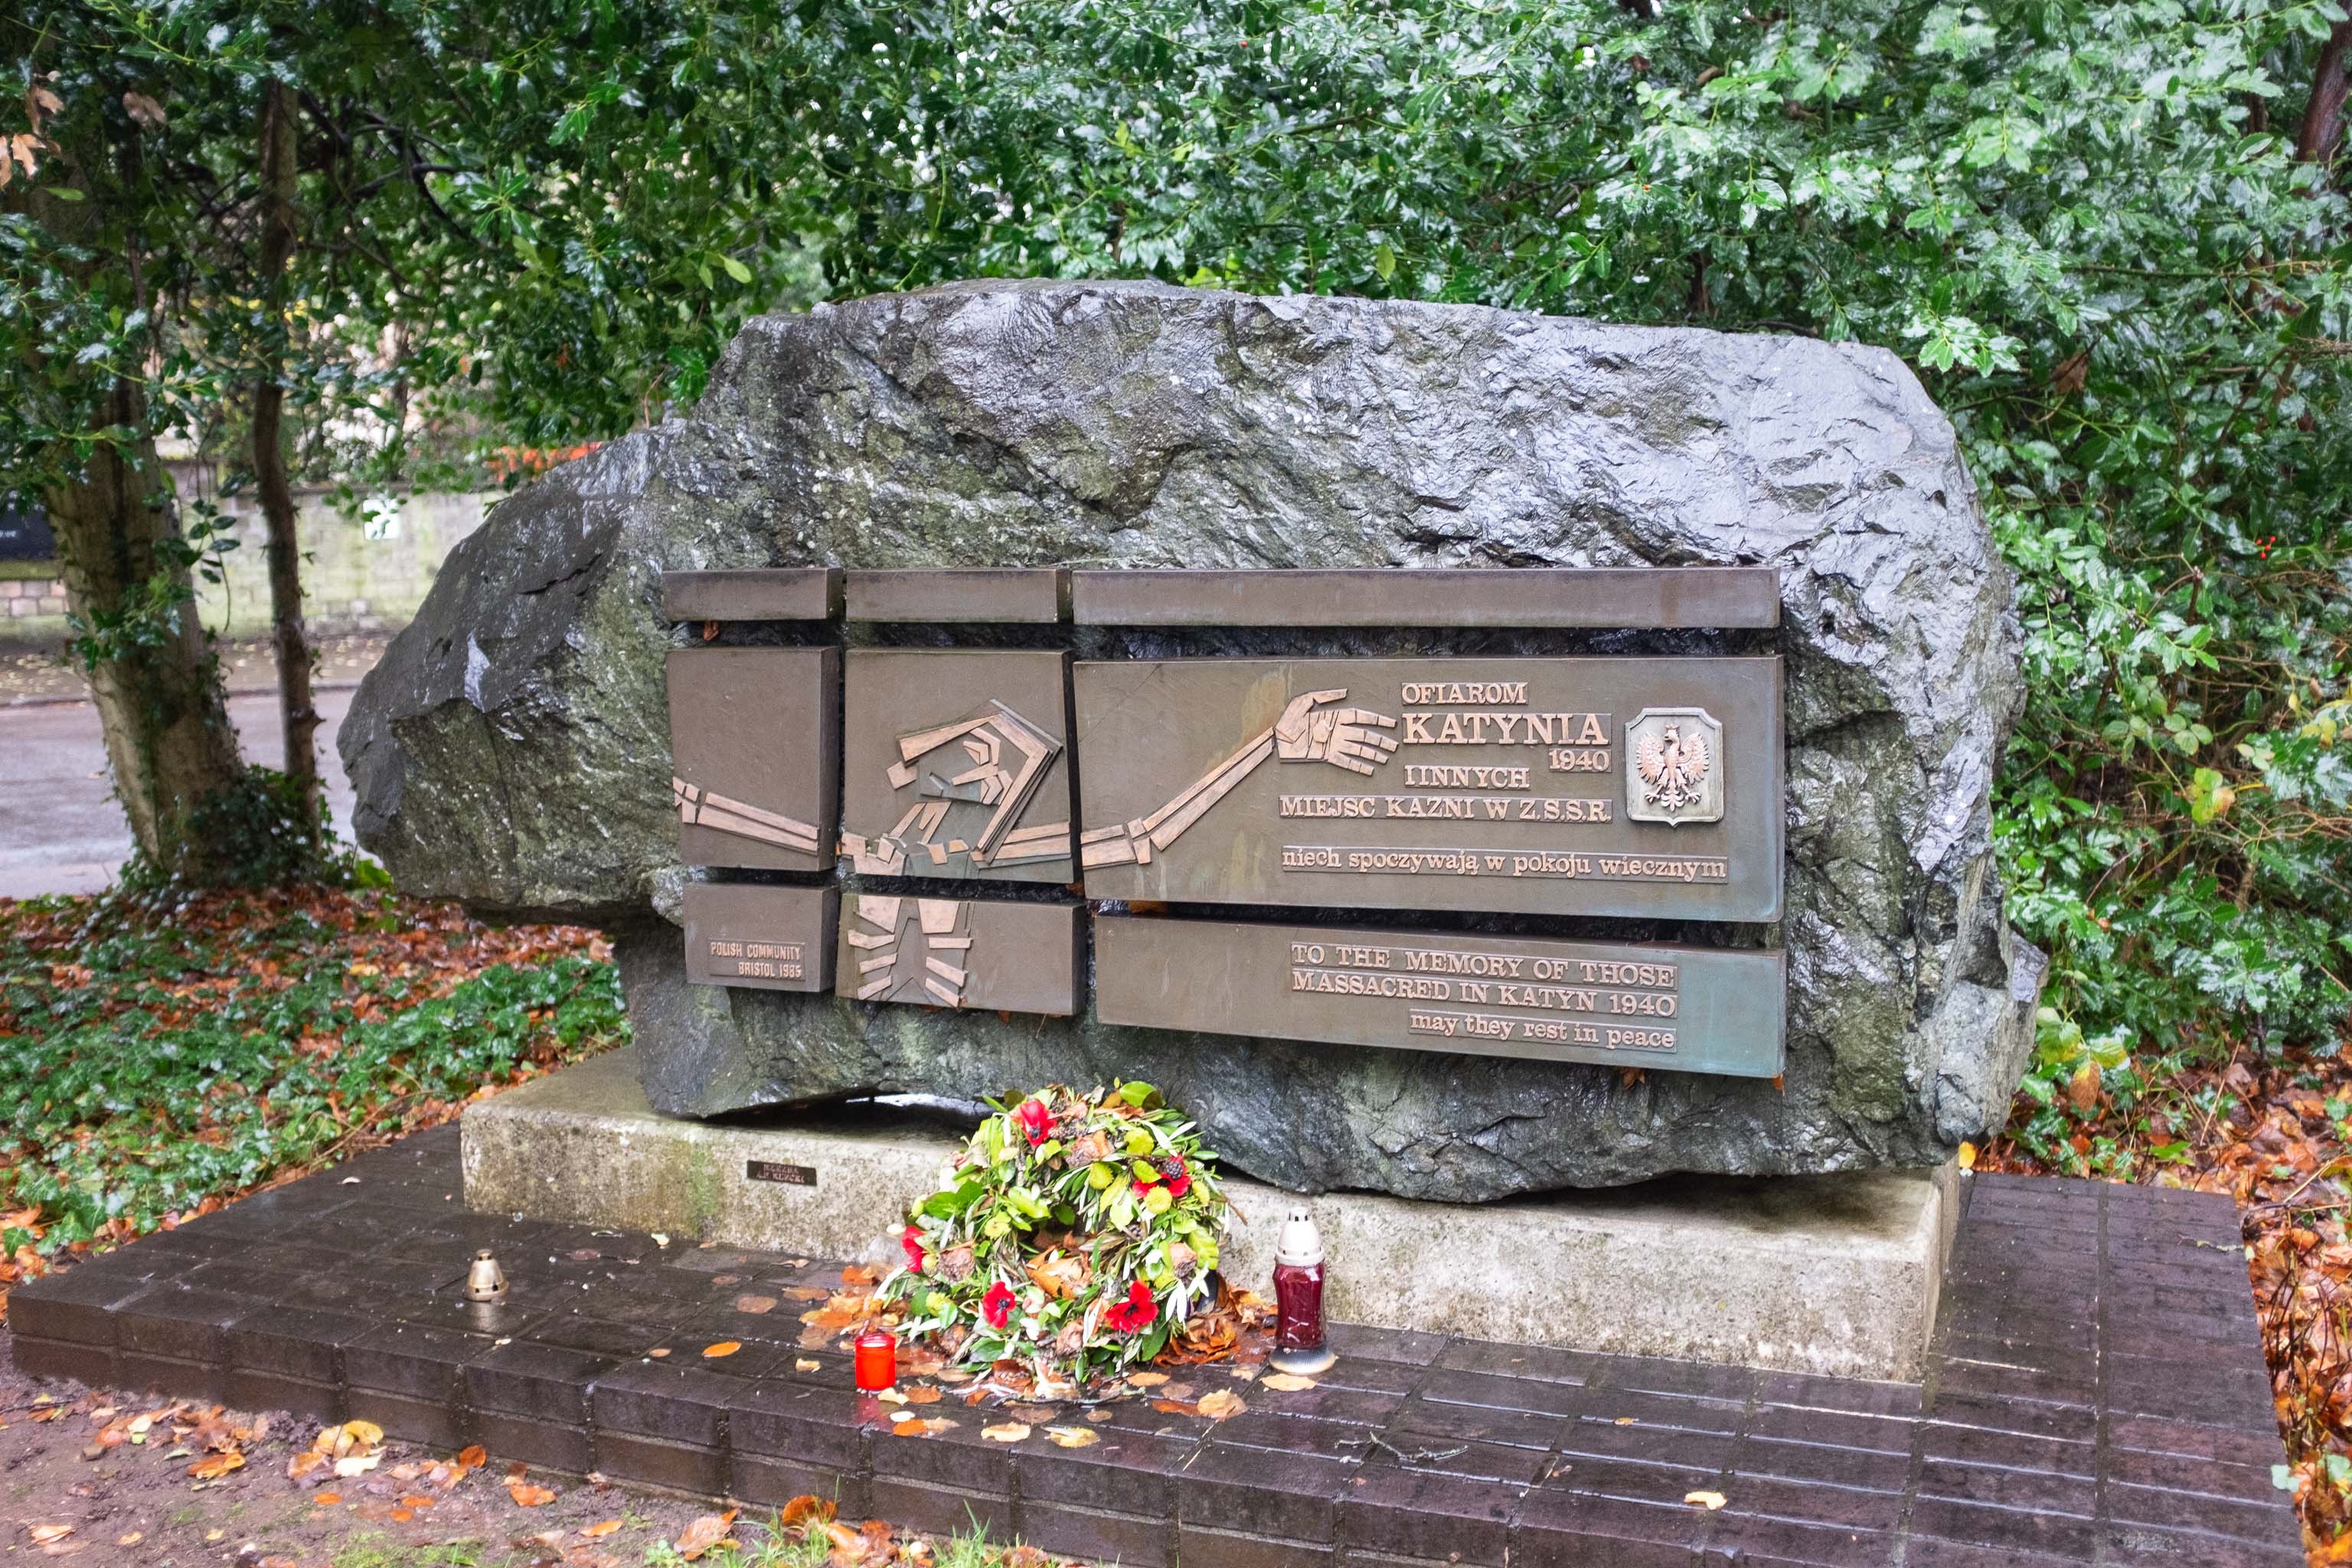 Katyn
"The Katyn massacre was a series of mass executions of nearly 22,000 Polish military officers and intelligentsia carried out by the Soviet Union, s...